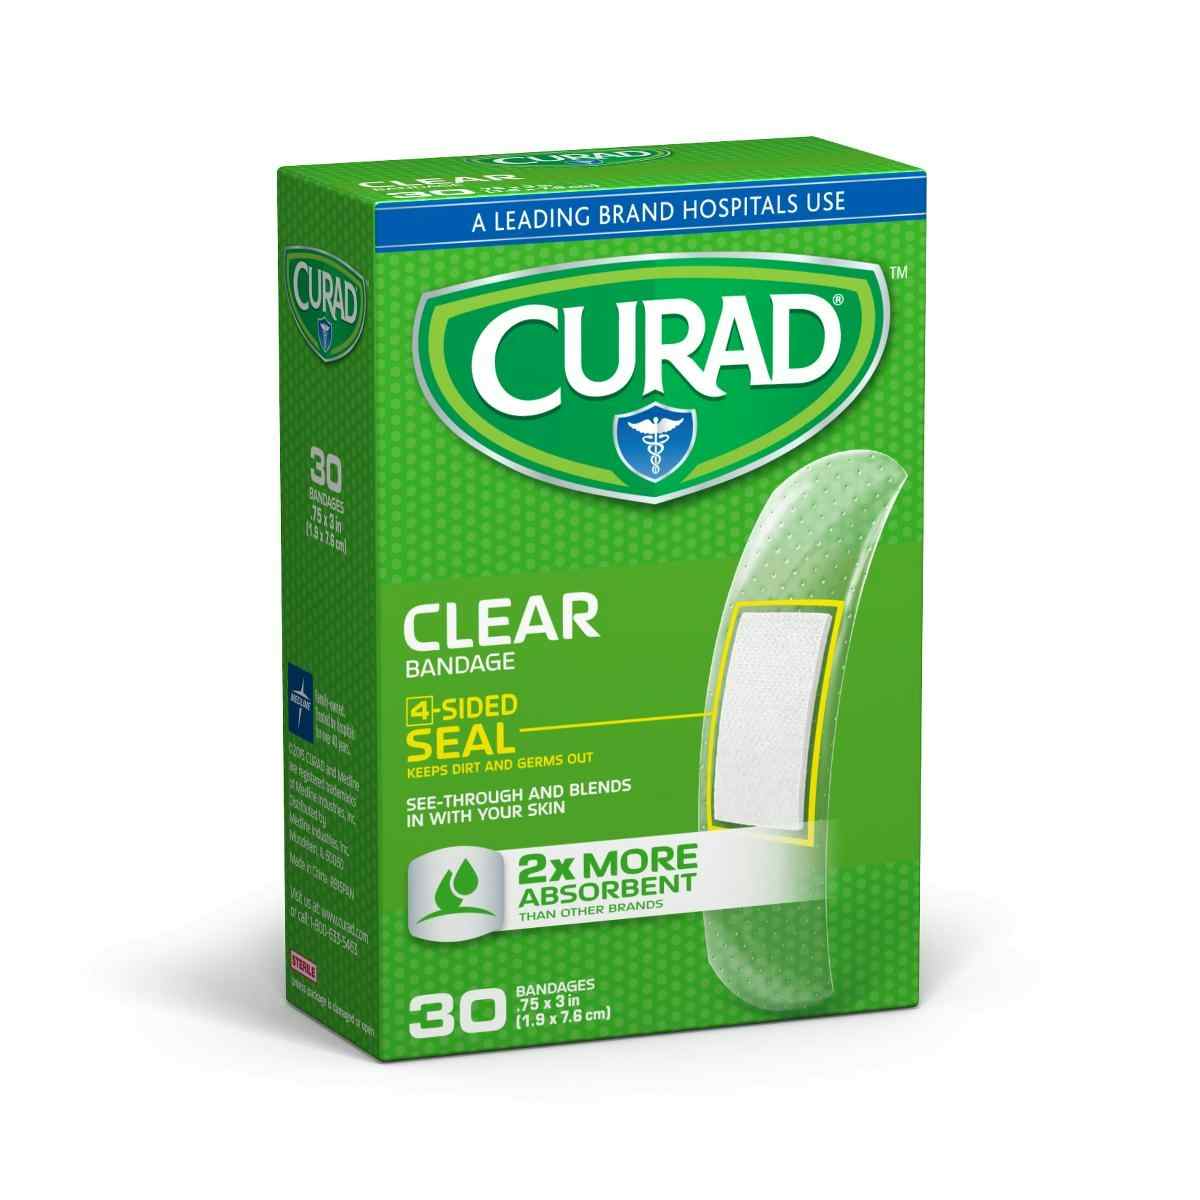 Curad Clear Adhesive Bandages, CUR44010RB, 3/4" X 3" - Case of 24